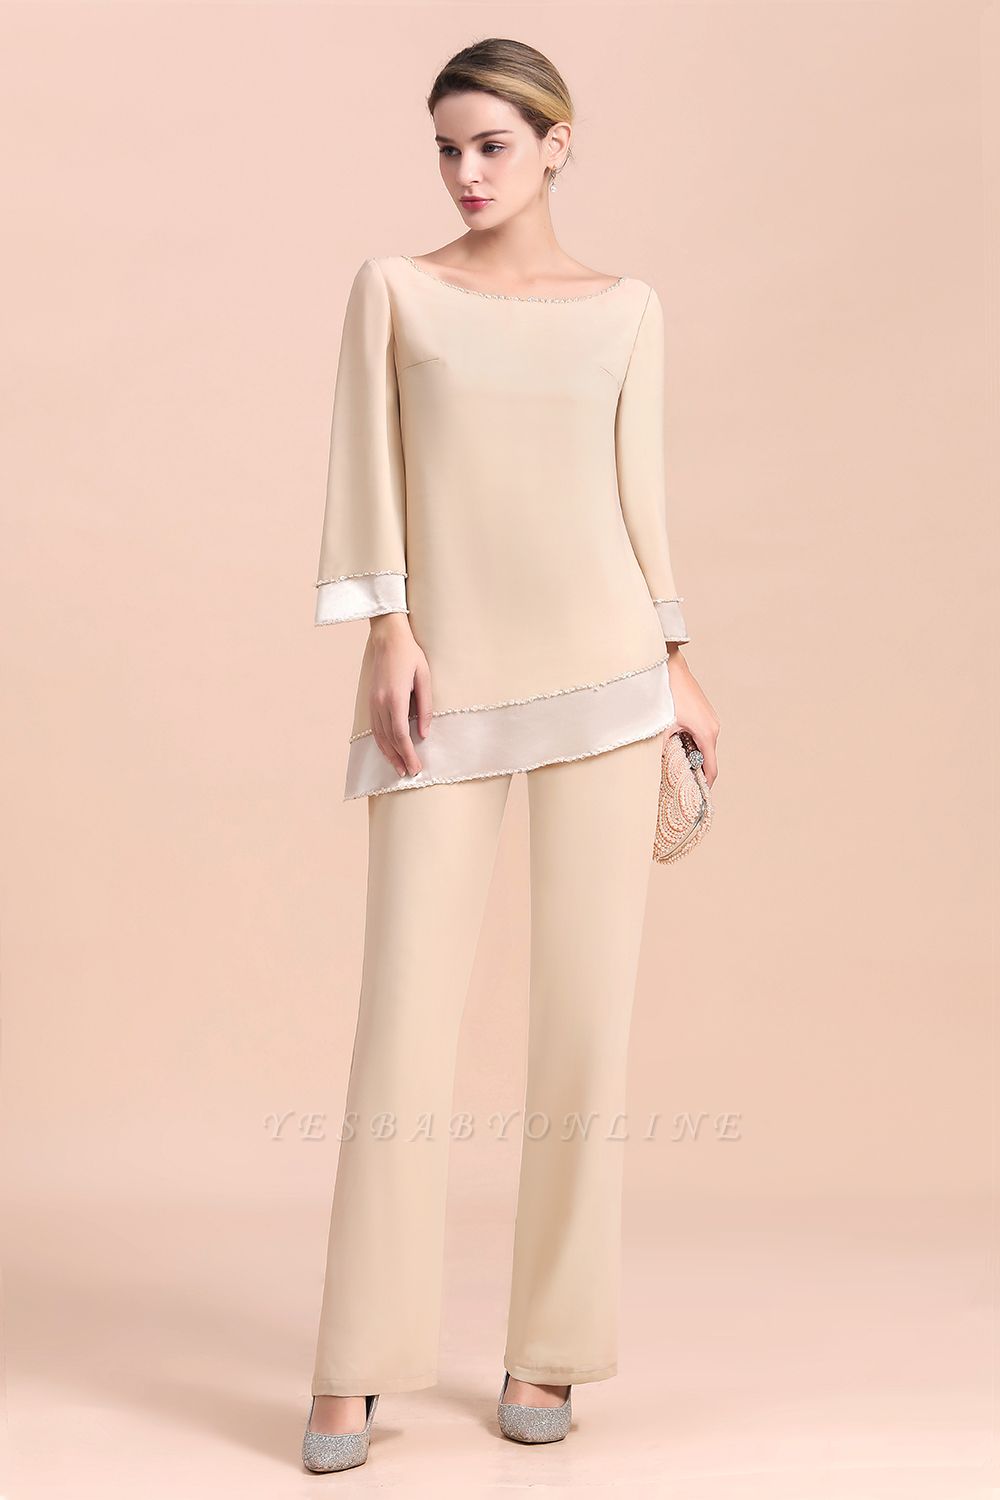 Champagne Bateau 3/4 Sleeves Chiffon Mother of Bride Pant Suits ...